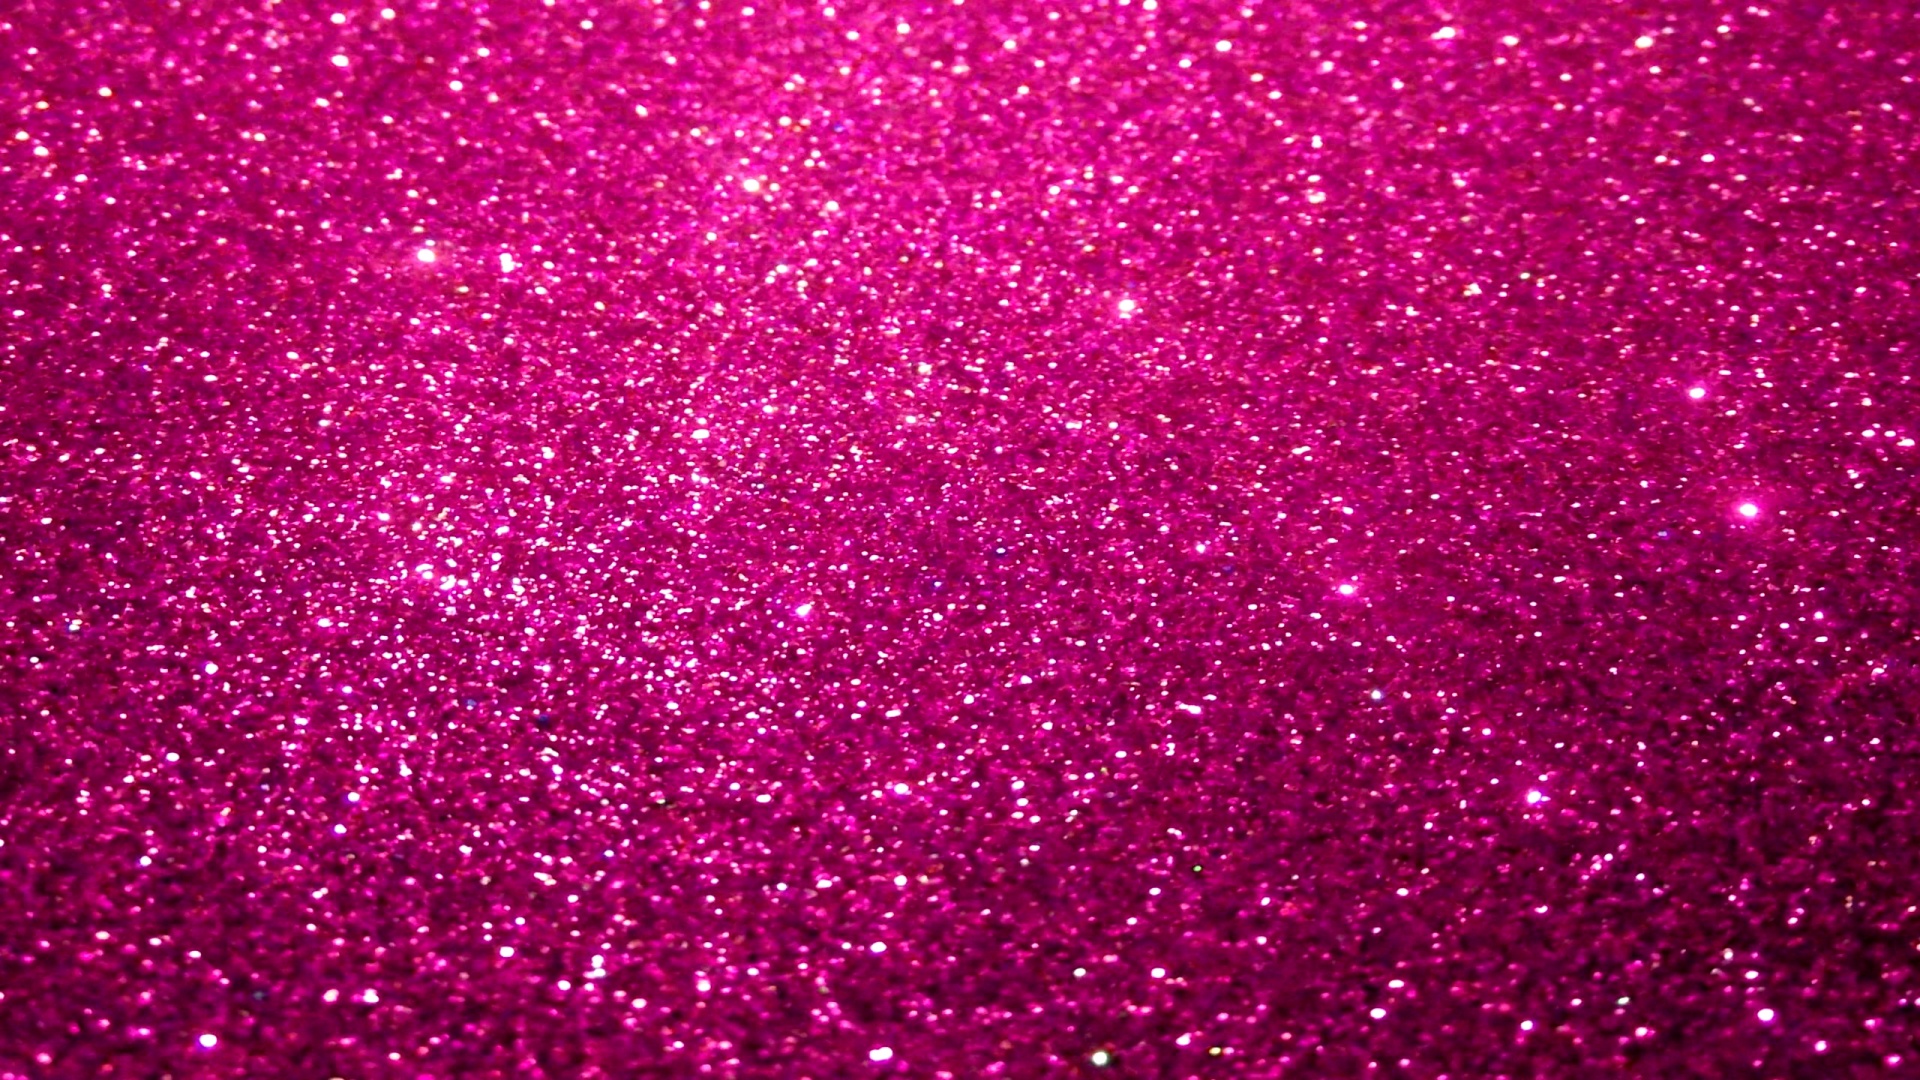 Hot Pink French Tip Nail Designs with Glitter - wide 1